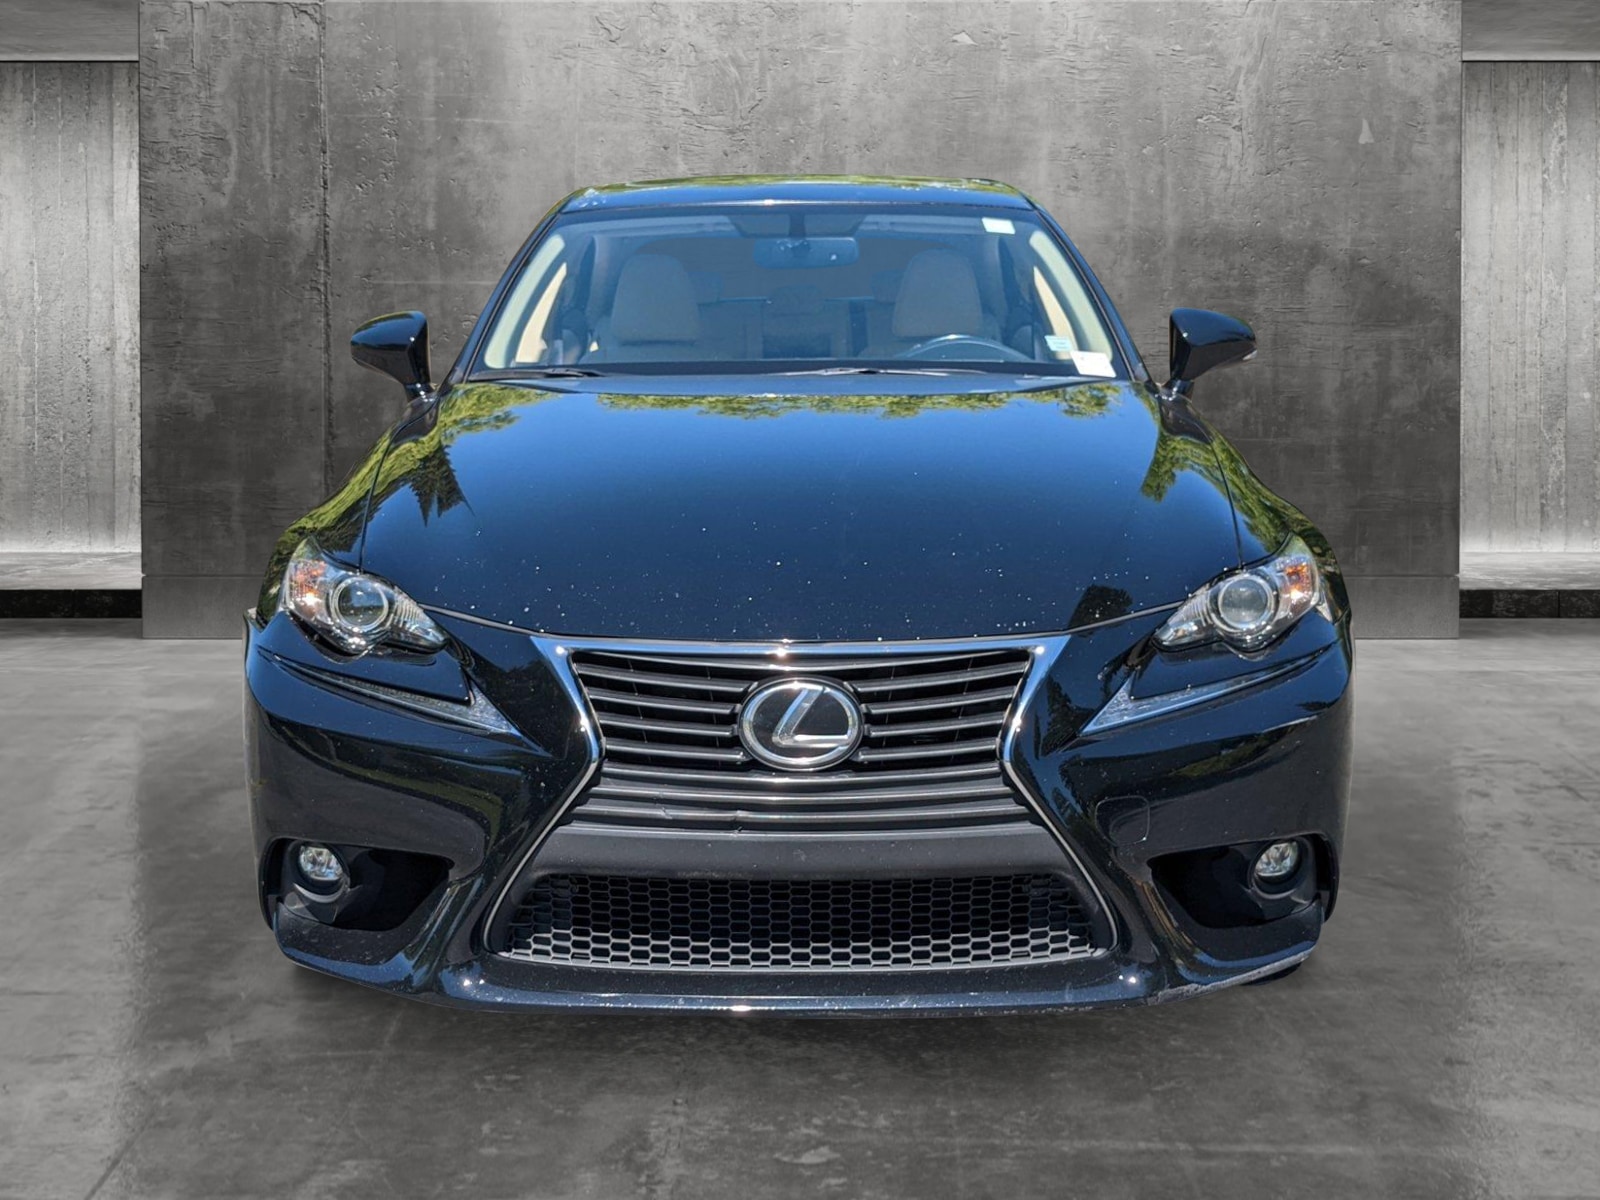 Used 2016 Lexus IS 200t with VIN JTHBA1D2XG5014166 for sale in Roseville, CA